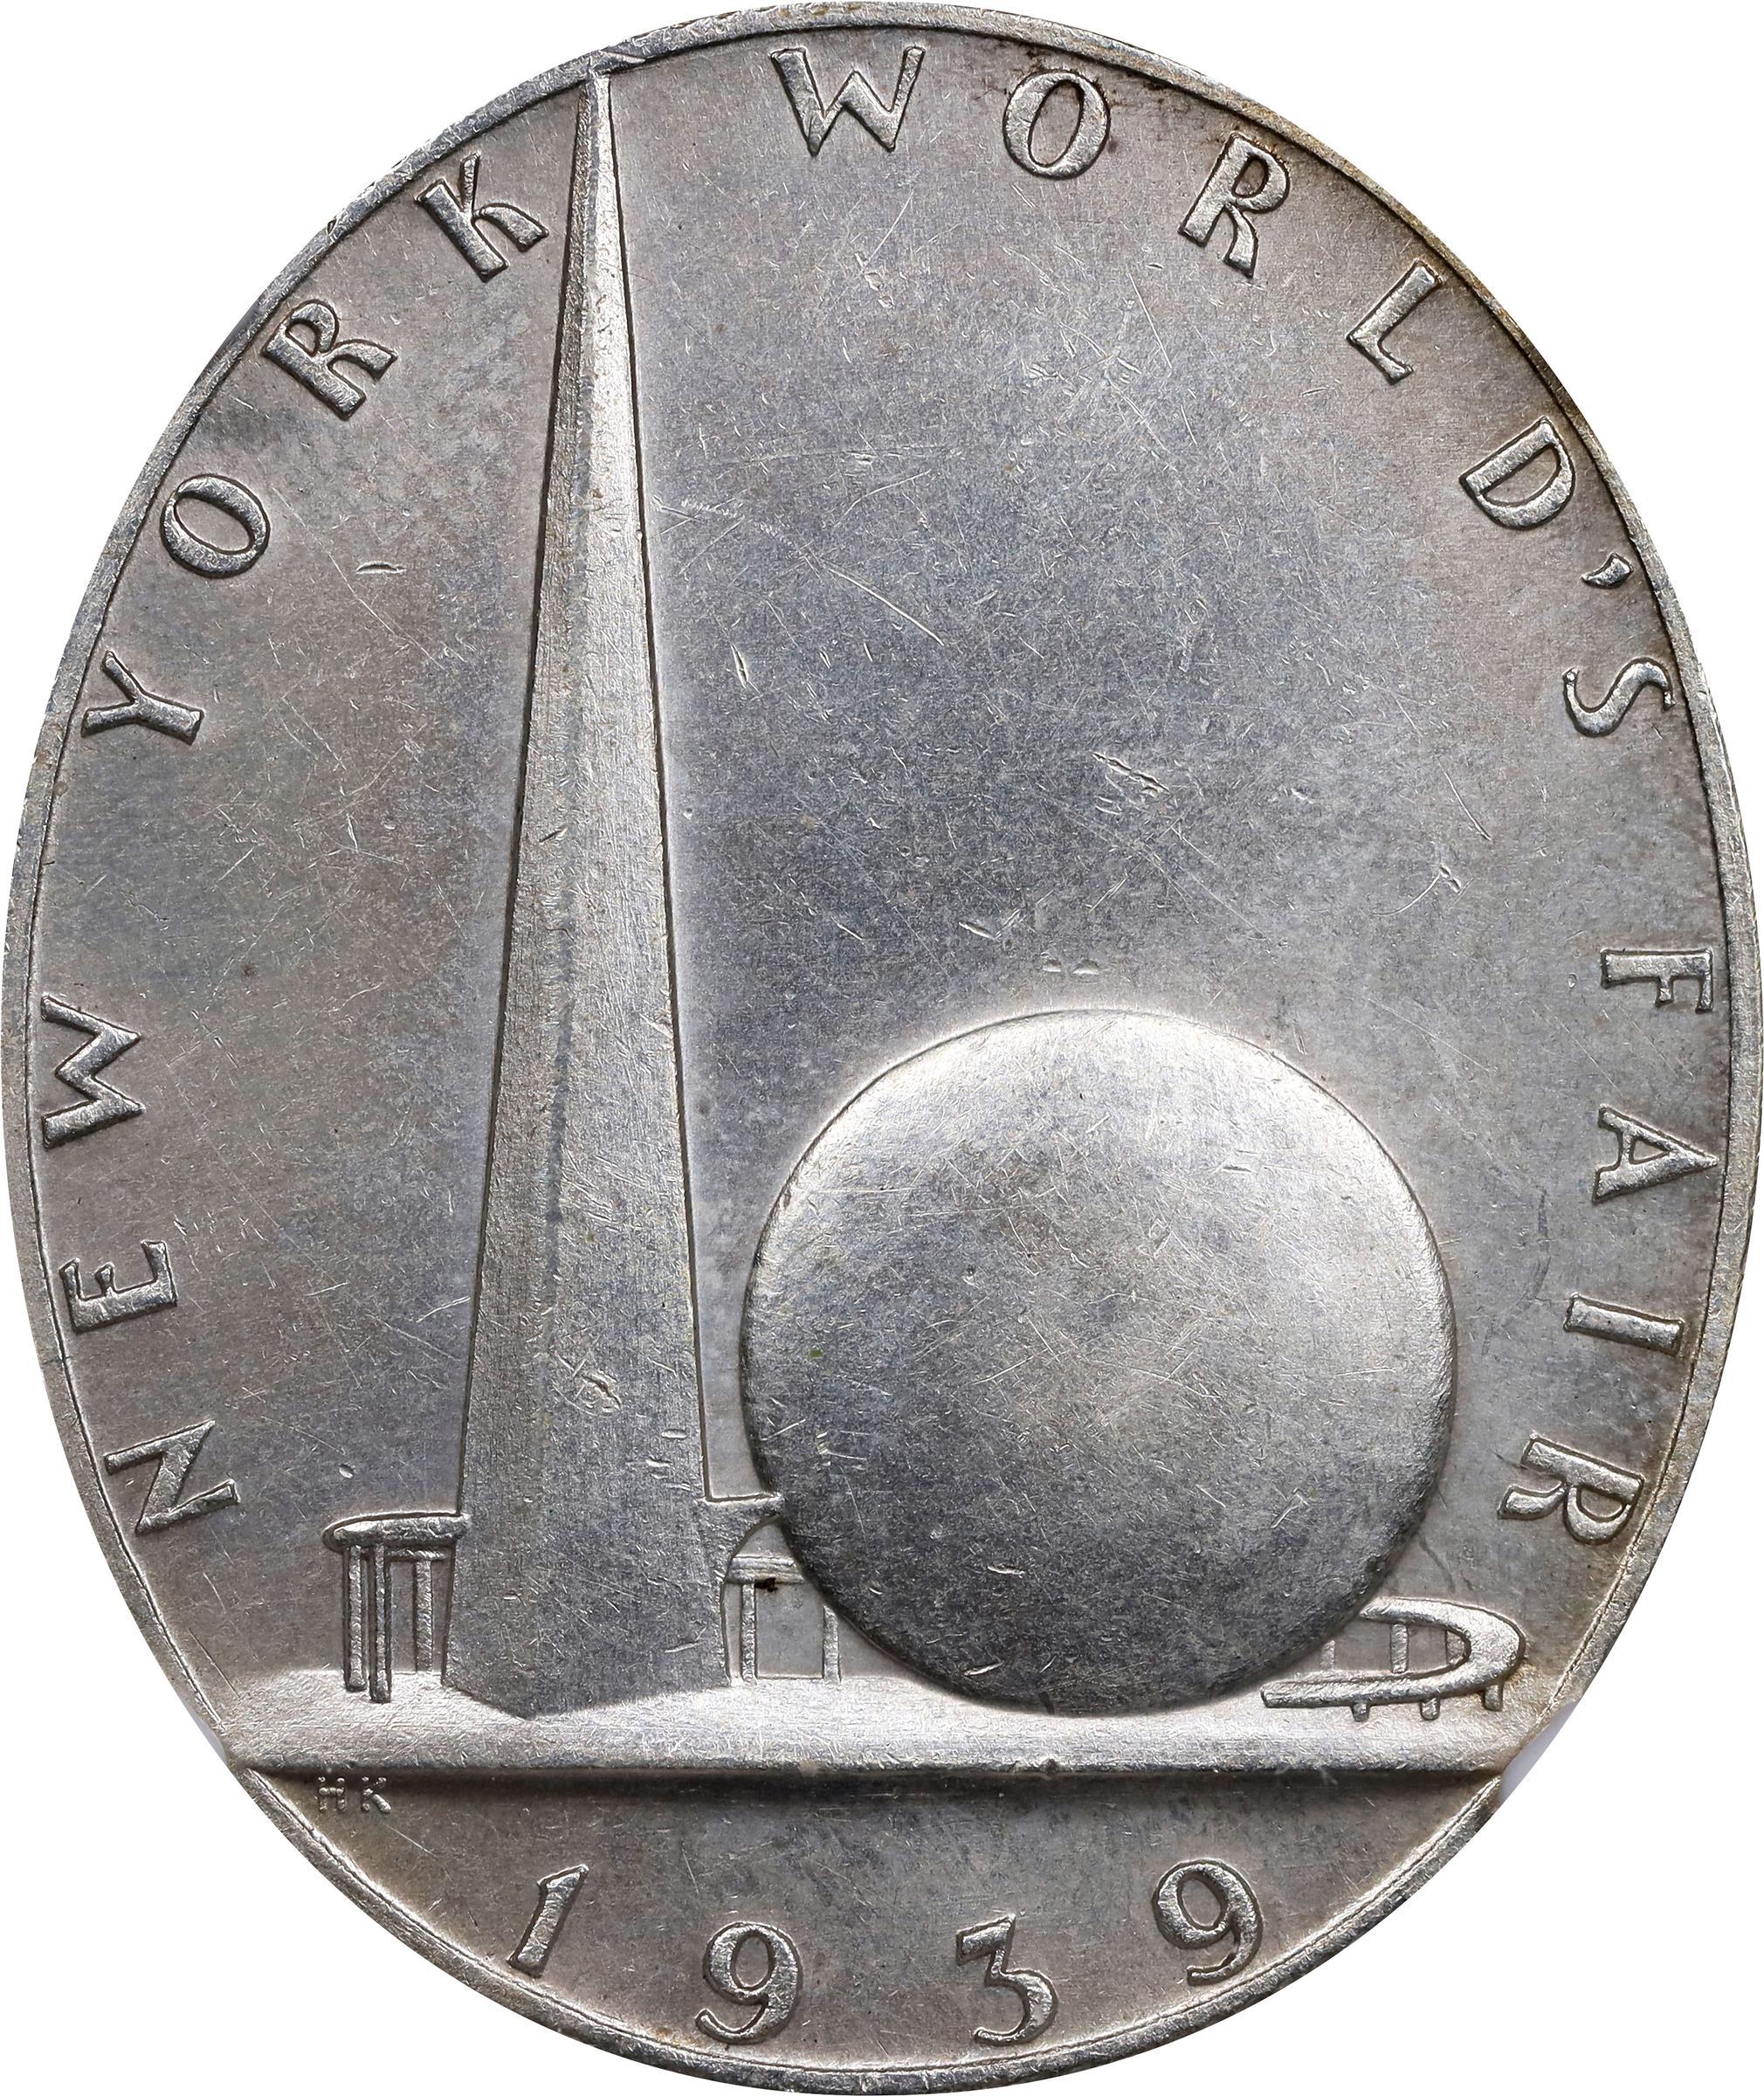 Medals of the 1939 New York World’s Fair – Commemorative and Award Collection